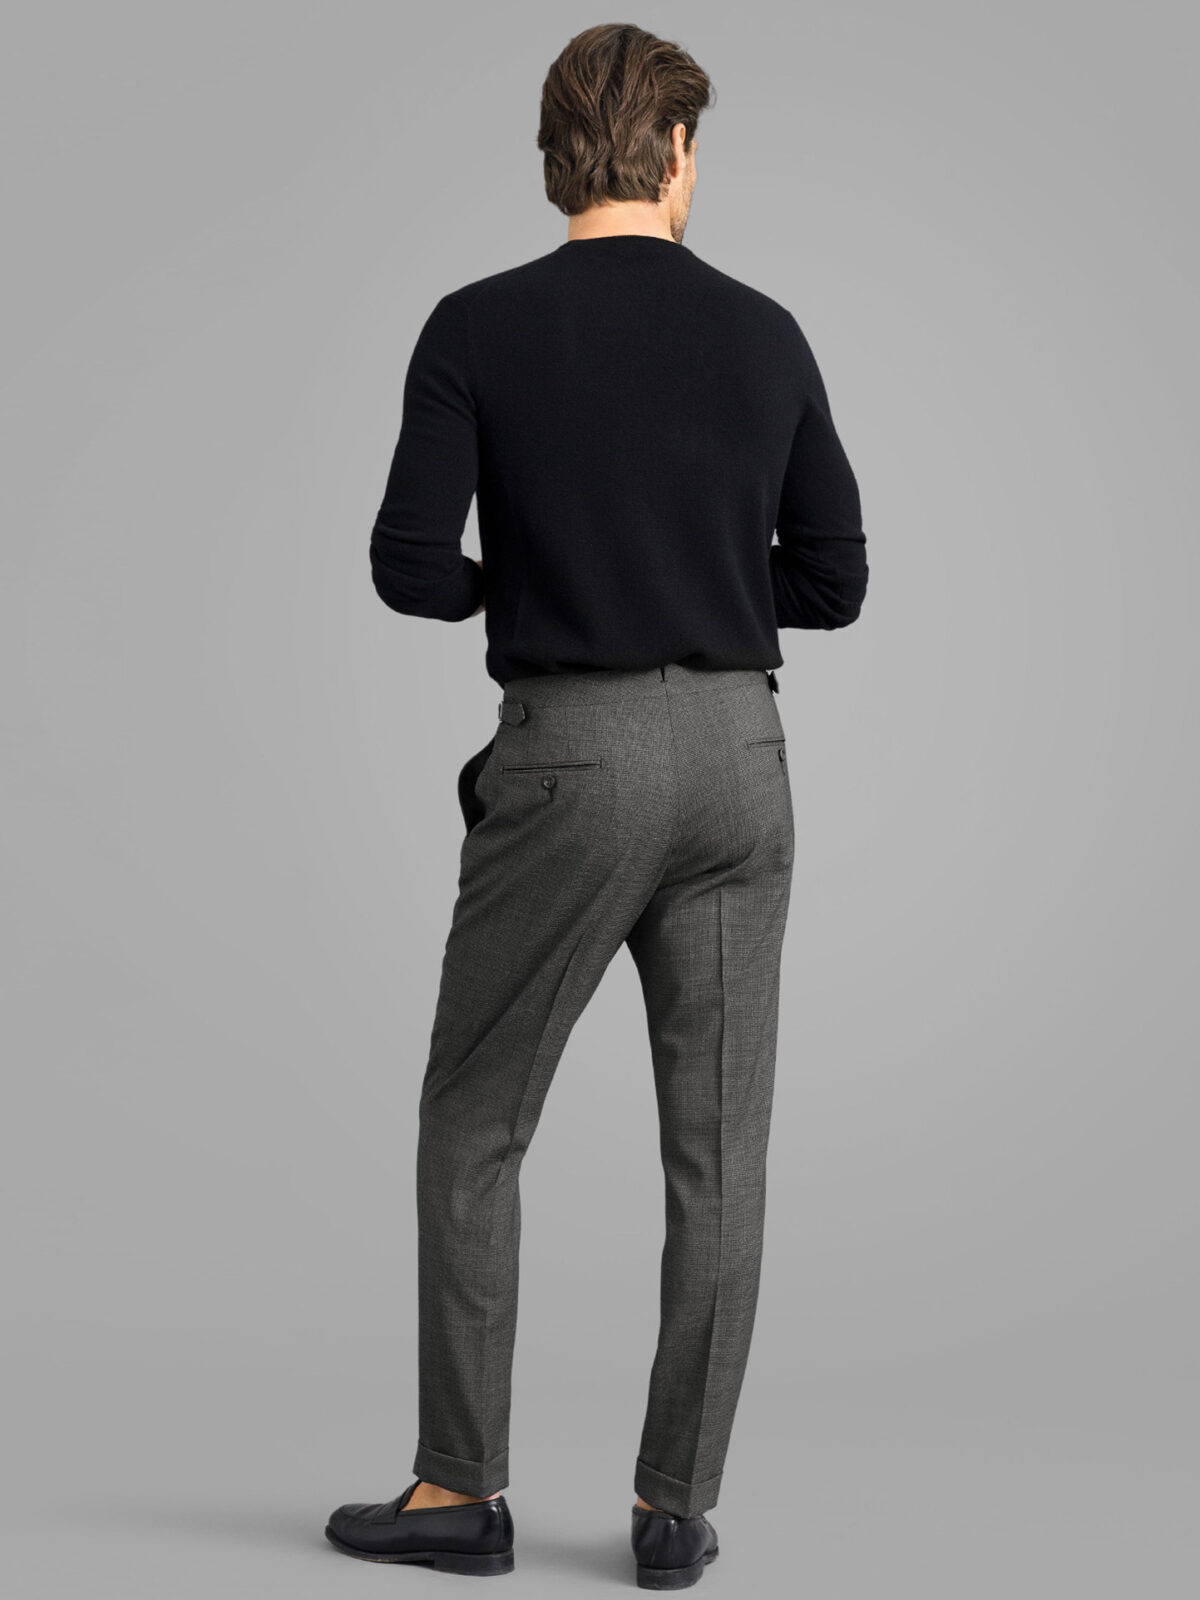 Grey Textured Weave Wool Stretch Dress Pant